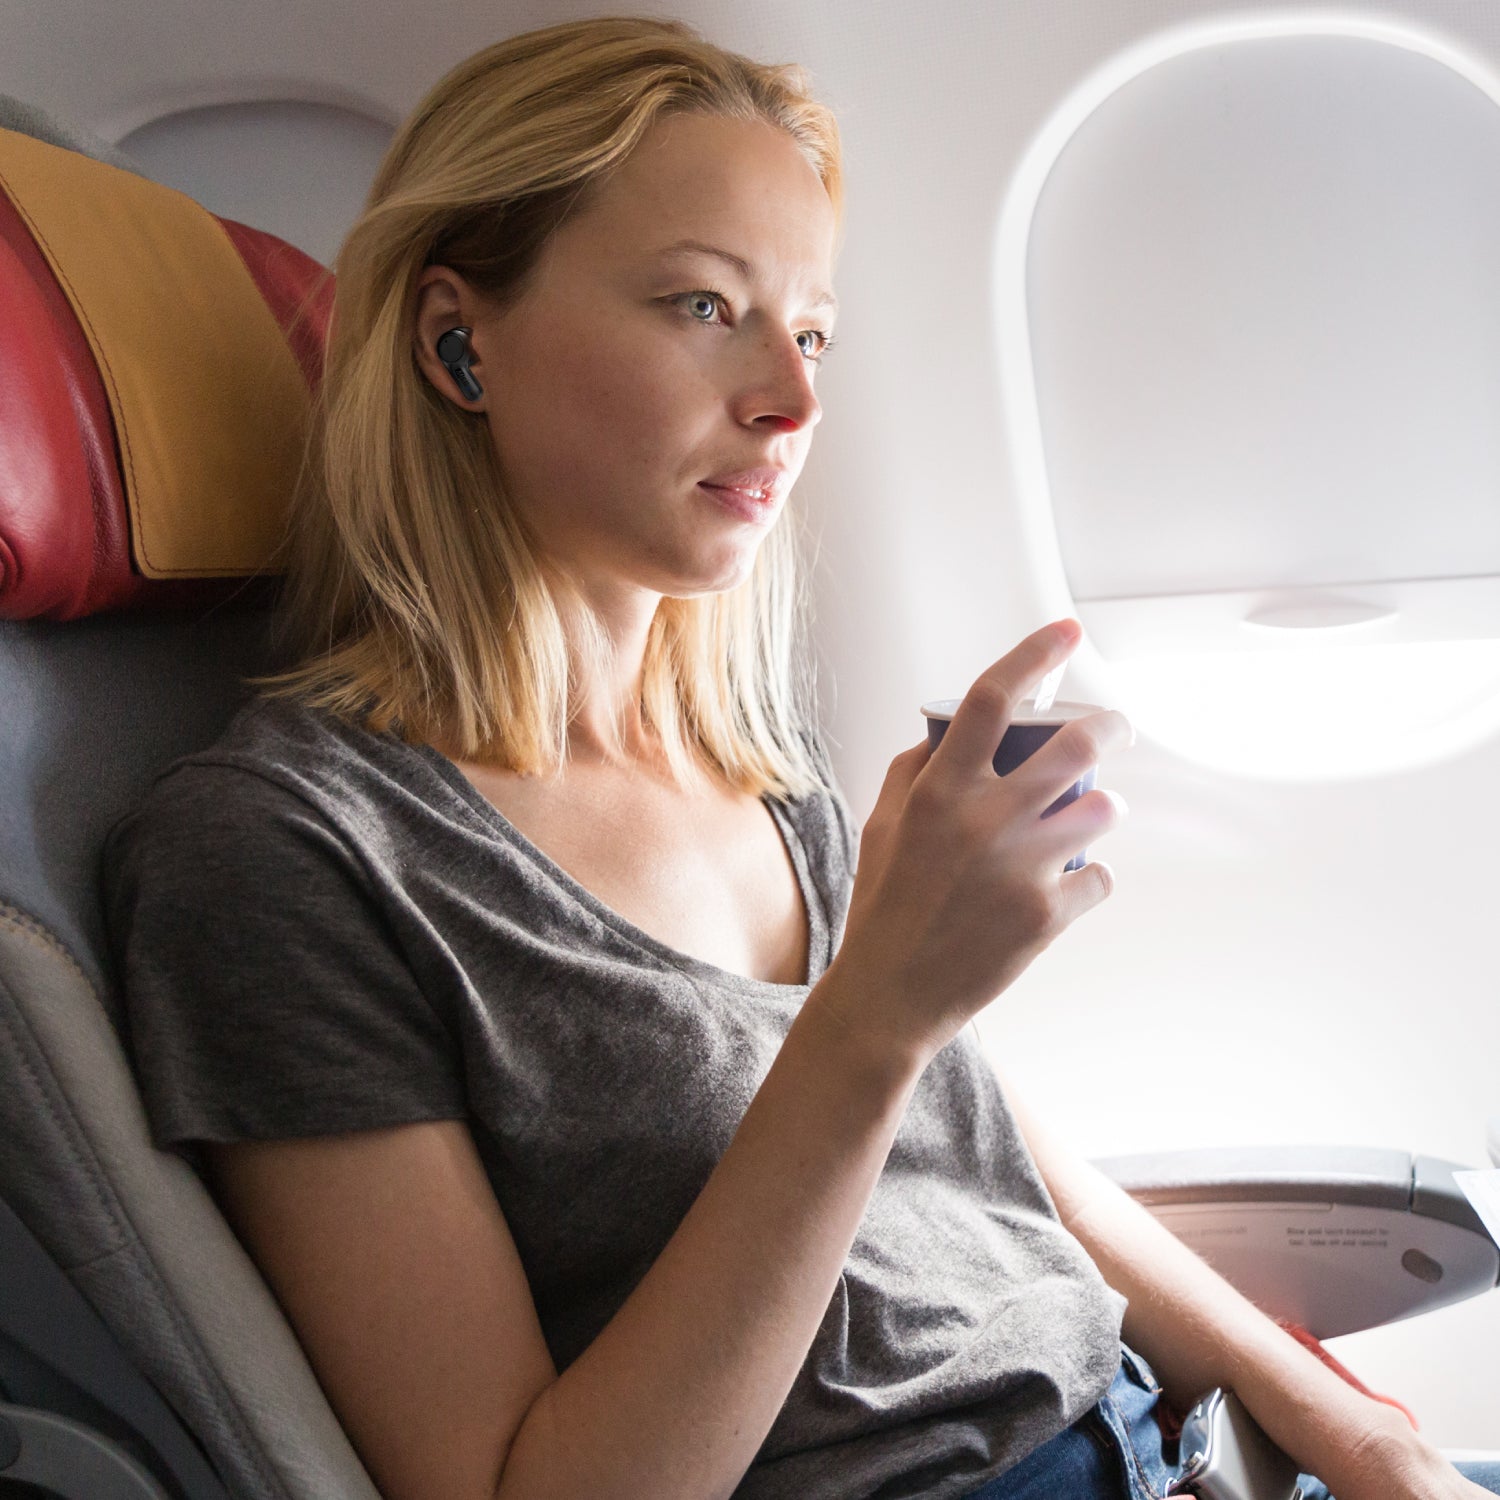 A woman with blonde hair sitting by an airplane window, wearing a gray t-shirt and using her smartphone, lit by natural light from outside.